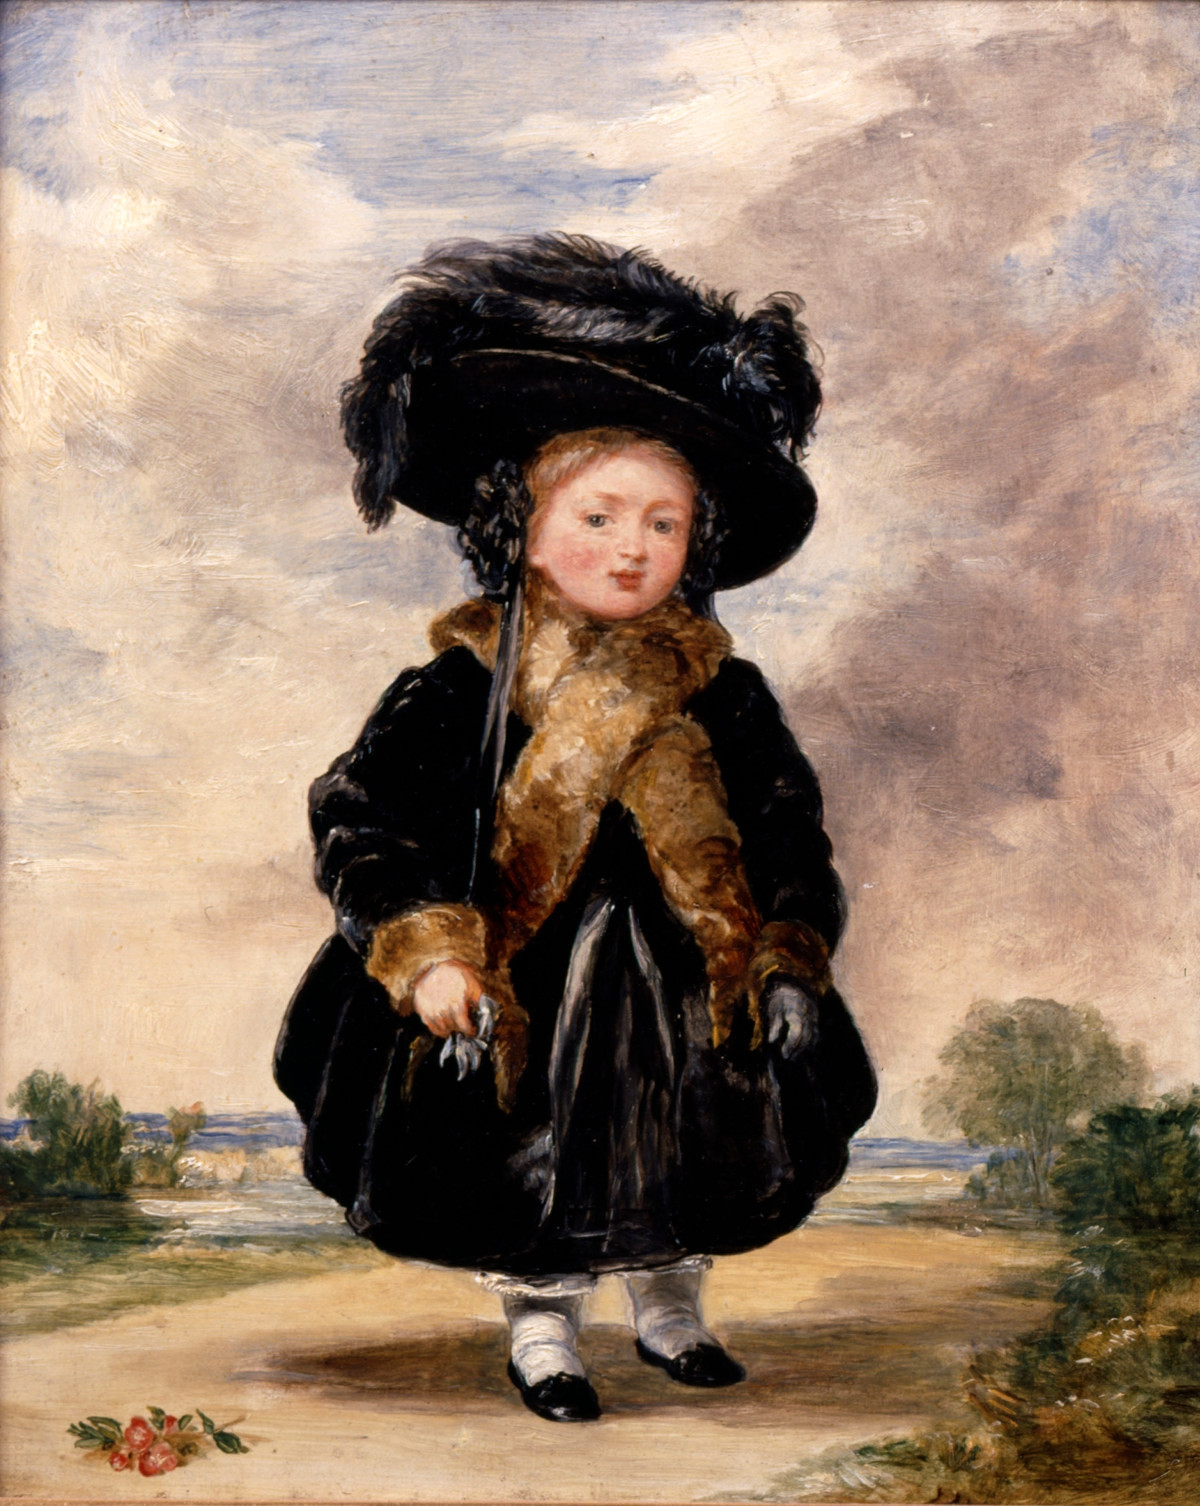 Victoria, aged four Painting by Stephen Poyntz Denning, 1823